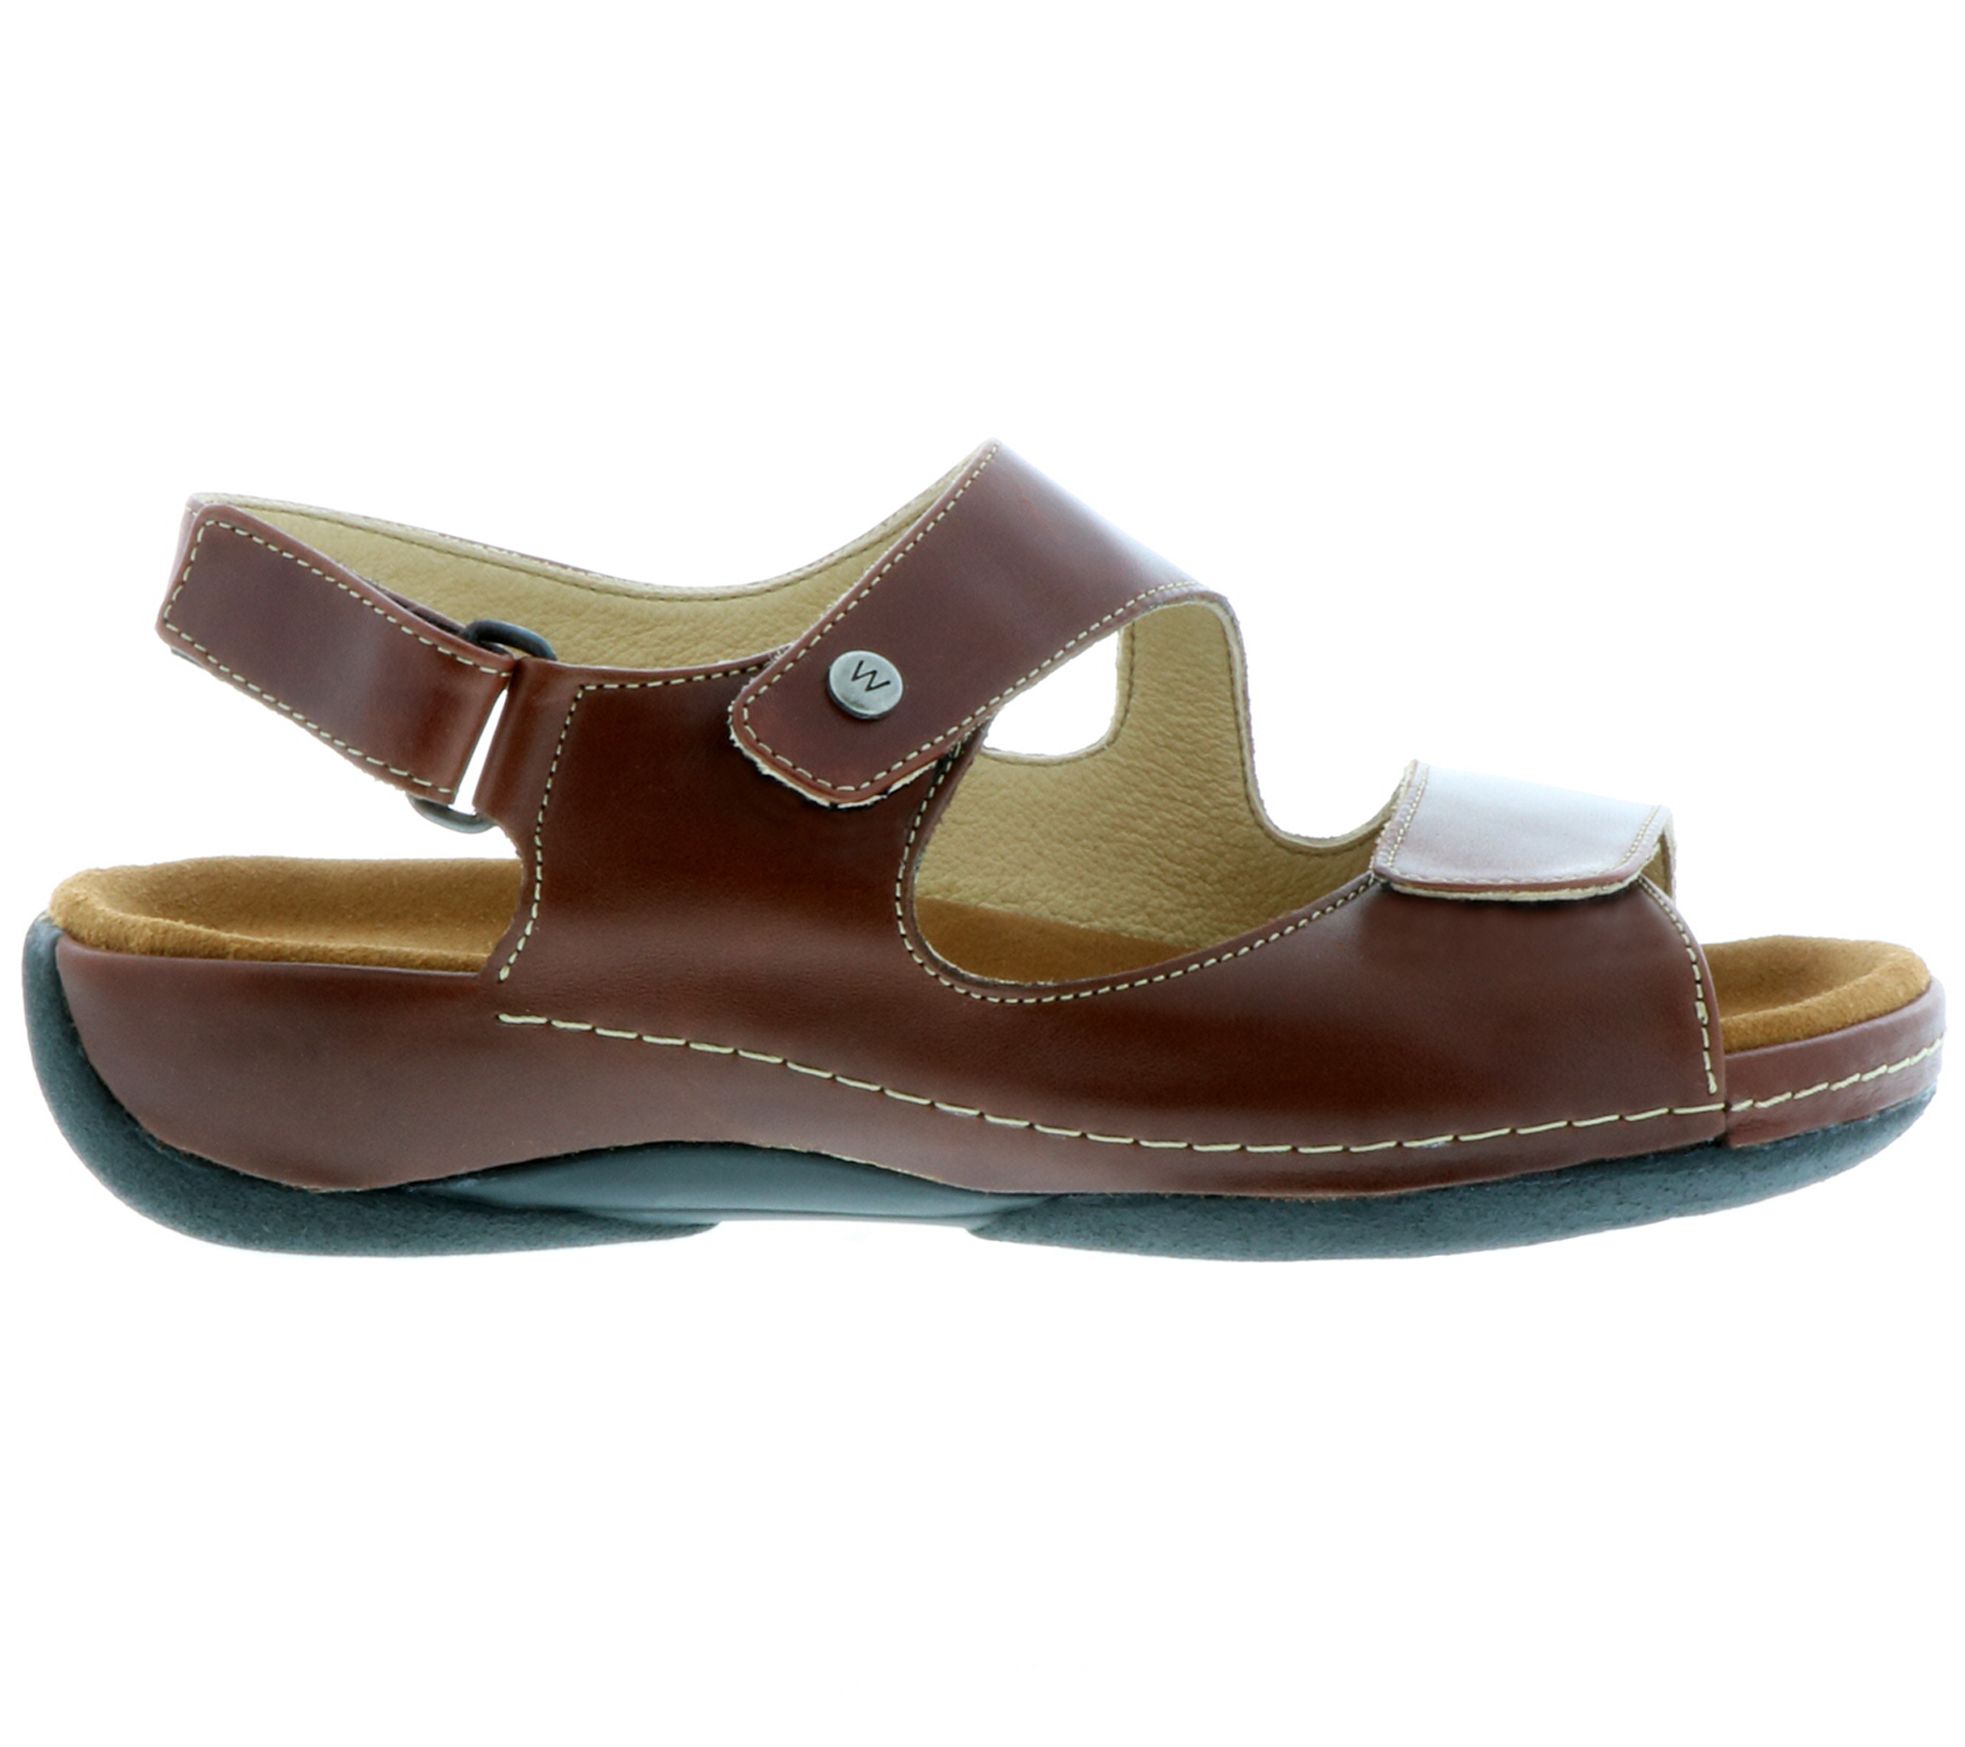 Wolky Double Strap Leather Sandals - Liana - QVC.com